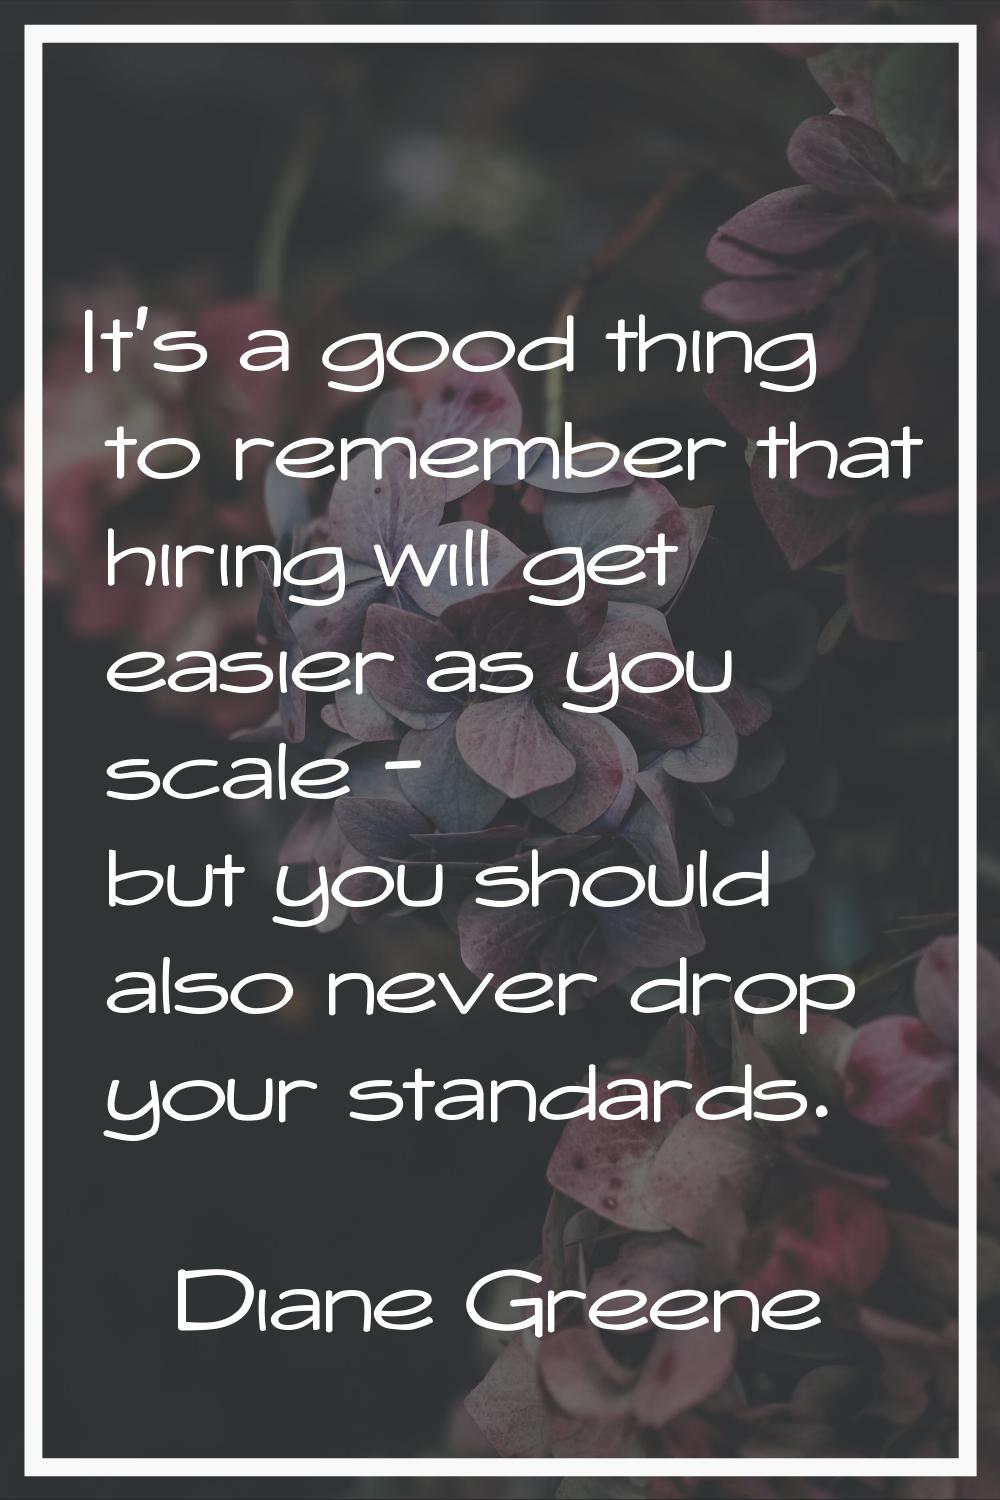 It's a good thing to remember that hiring will get easier as you scale - but you should also never 